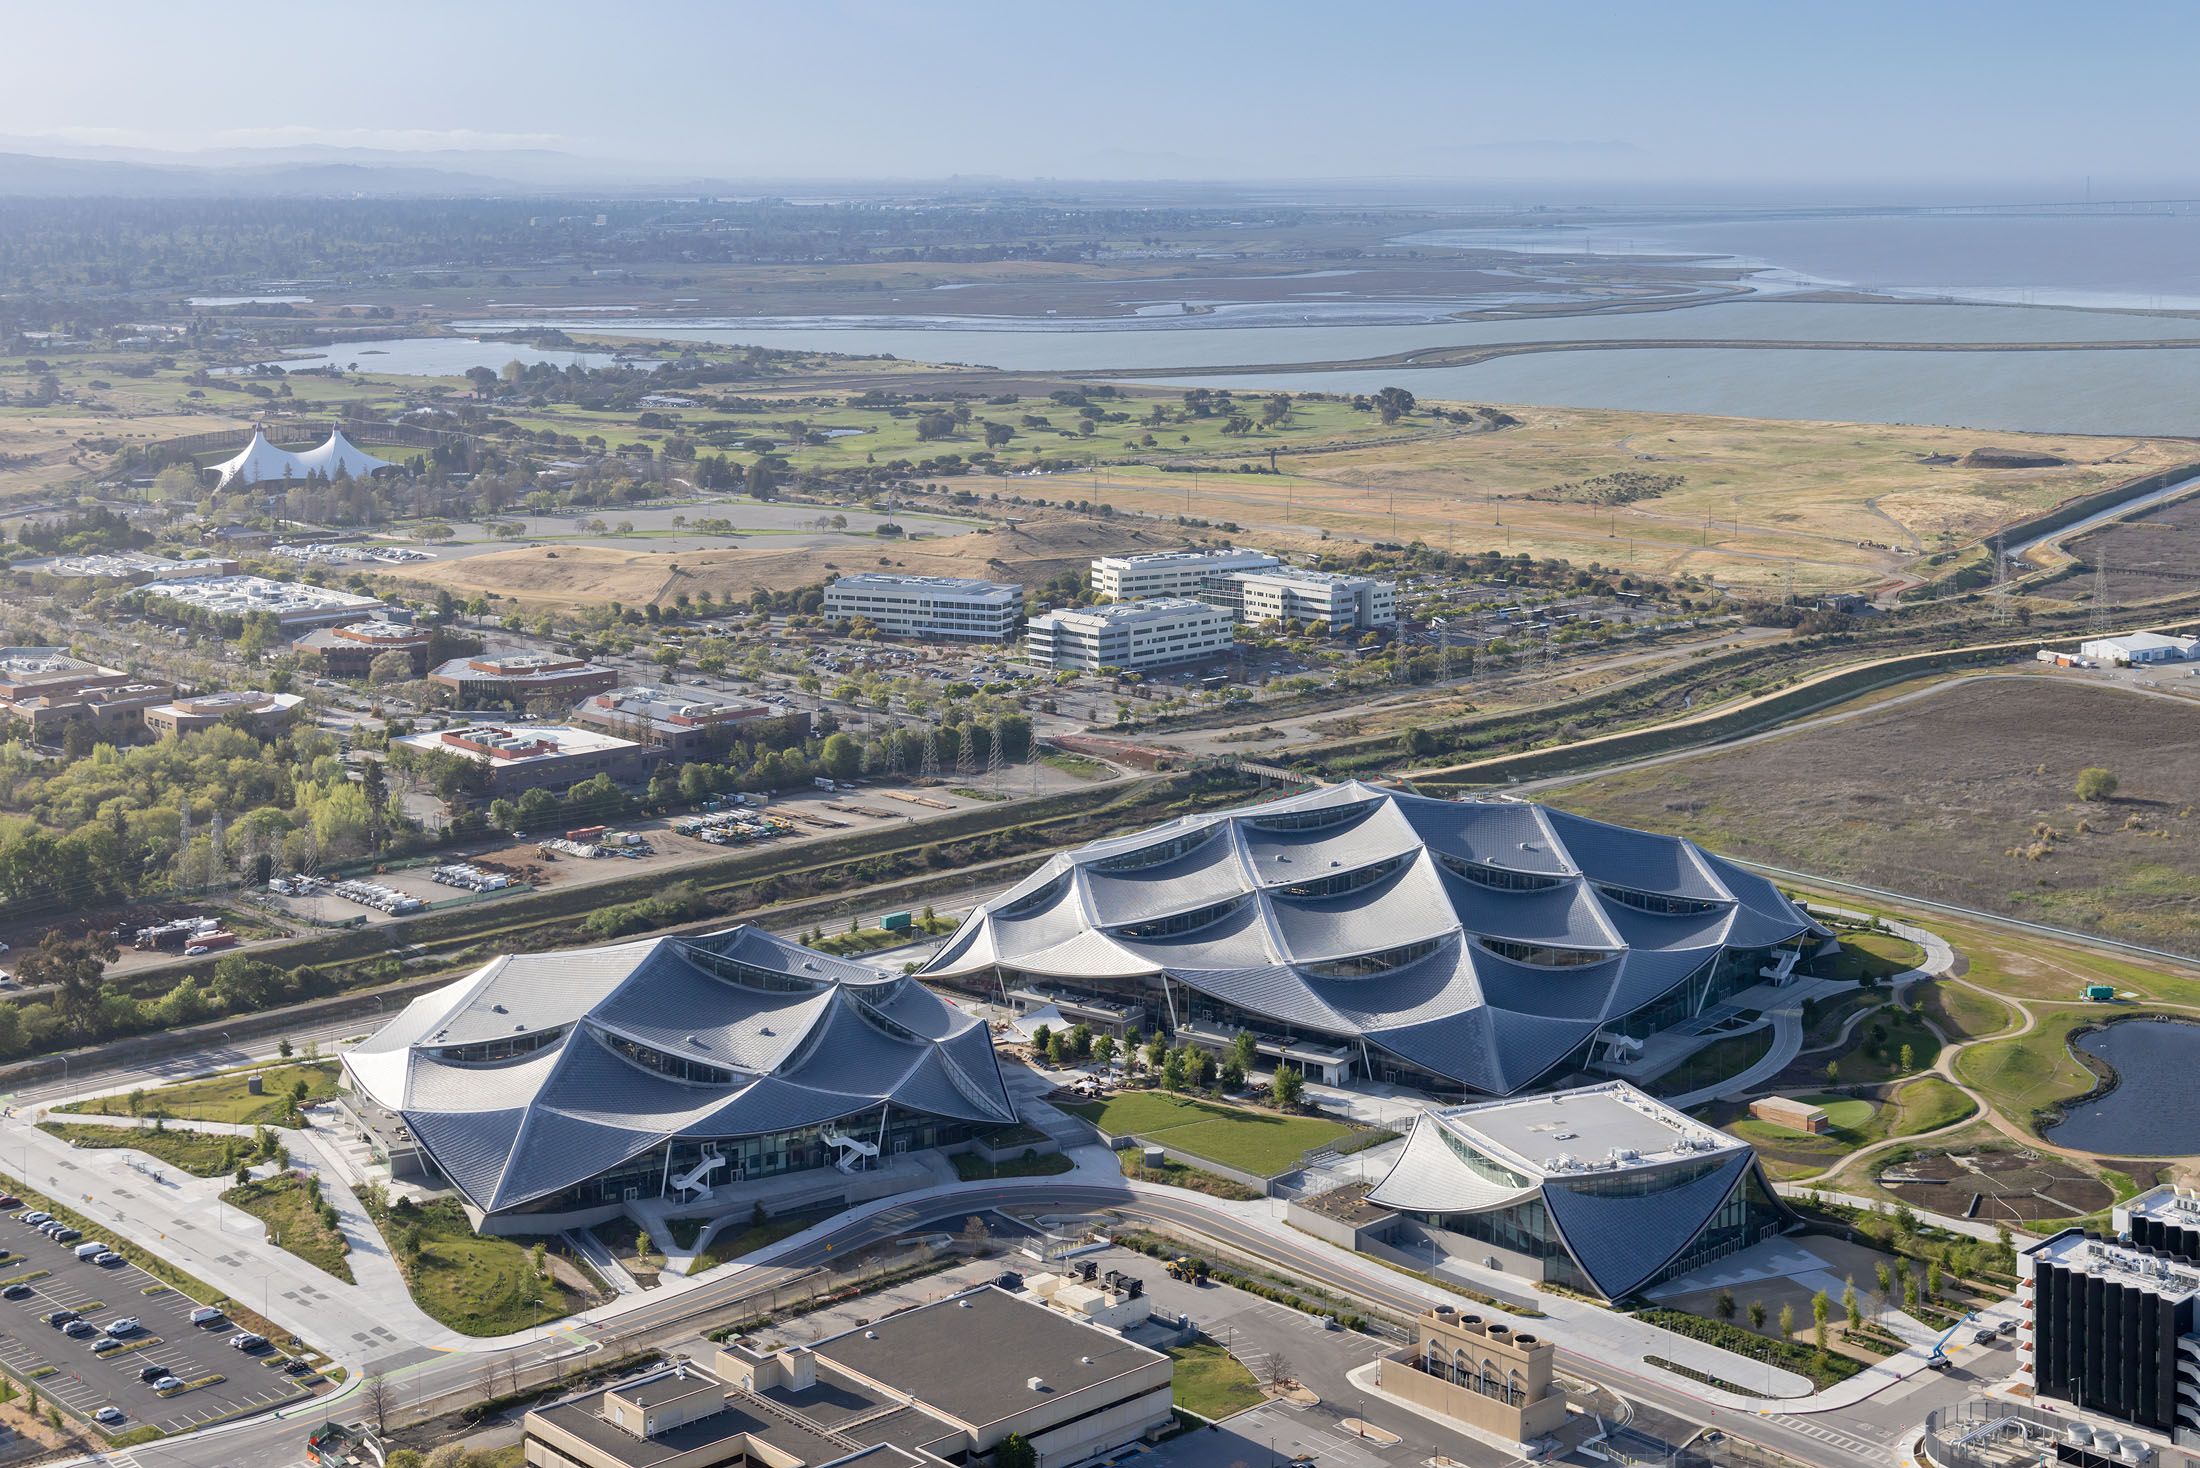 Google Bay View was designed by Heatherwick and the Bjarke Ingels Group (BIG)